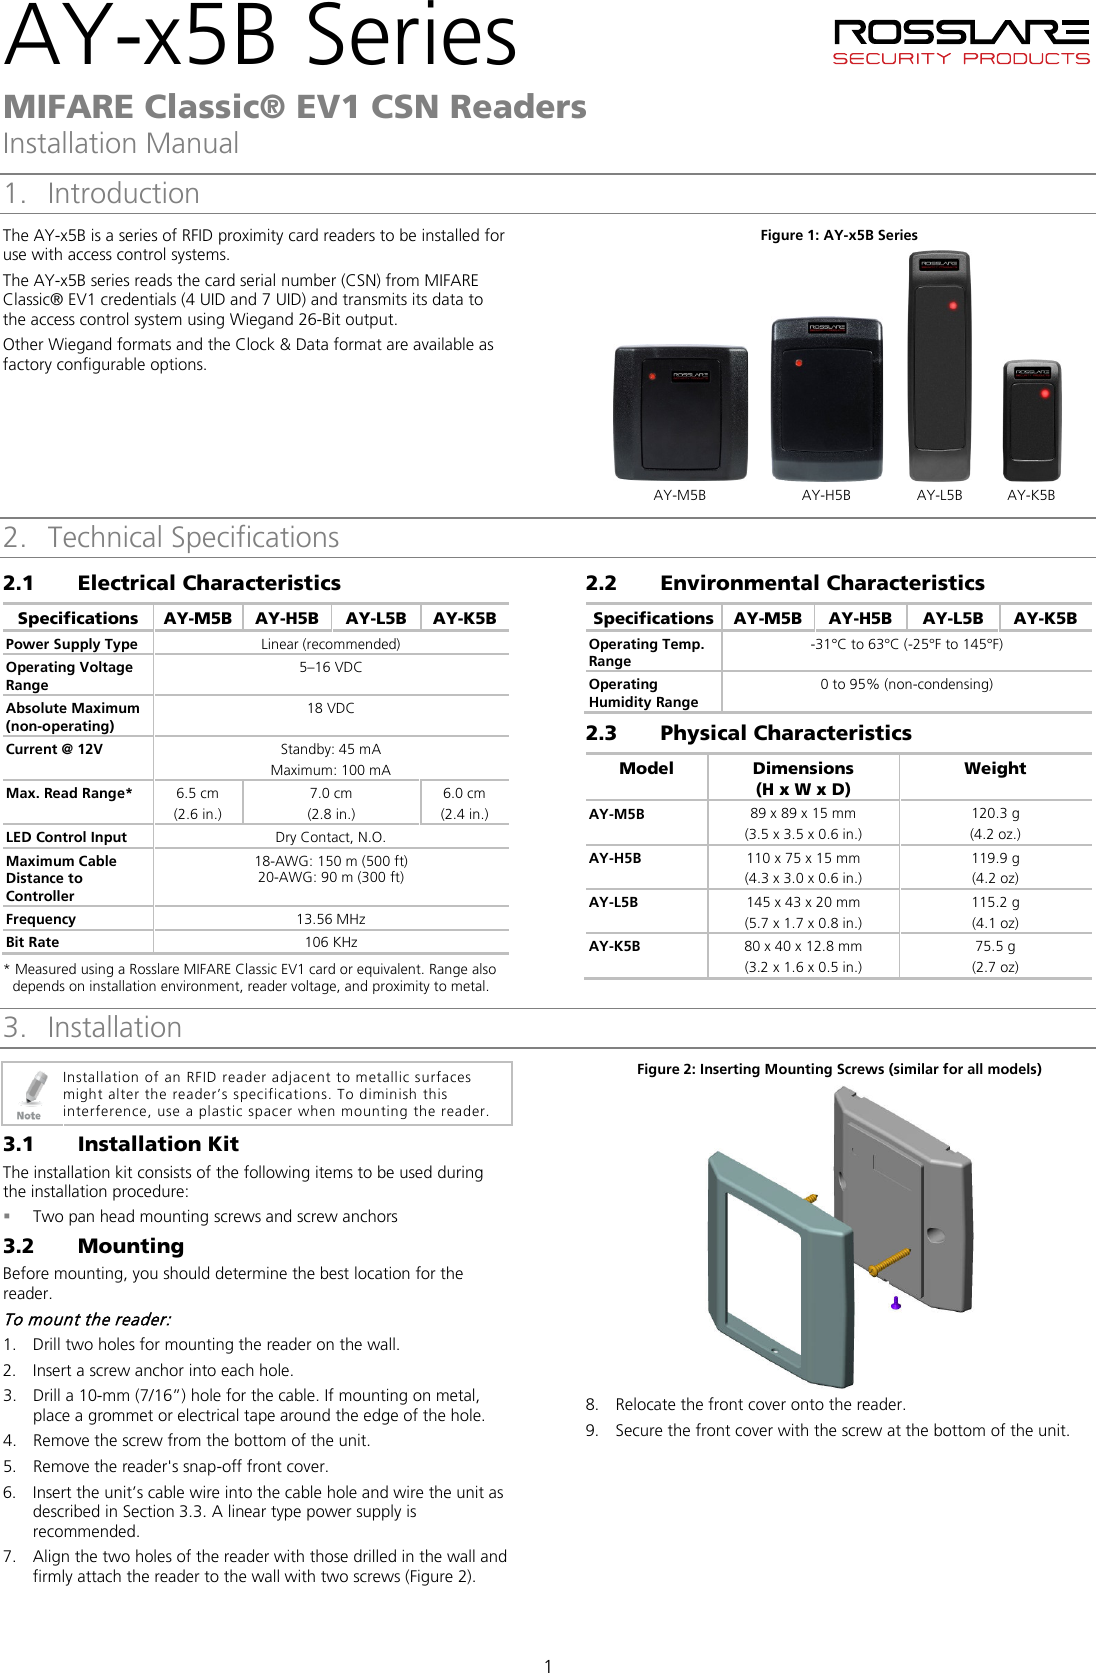 AY-x5B Series   MIFARE Classic® EV1 CSN Readers Installation Manual 1 1. Introduction The AY-x5B is a series of RFID proximity card readers to be installed for use with access control systems. The AY-x5B series reads the card serial number (CSN) from MIFARE Classic® EV1 credentials (4 UID and 7 UID) and transmits its data to the access control system using Wiegand 26-Bit output. Other Wiegand formats and the Clock &amp; Data format are available as factory configurable options. Figure 1: AY-x5B Series        AY-M5B  AY-H5B  AY-L5B  AY-K5B 2. Technical Specifications 2.1 Electrical Characteristics Specifications AY-M5B  AY-H5B  AY-L5B  AY-K5B Power Supply Type Linear (recommended) Operating Voltage Range 5–16 VDC Absolute Maximum (non-operating) 18 VDC Current @ 12V Standby: 45 mA Maximum: 100 mA Max. Read Range*  6.5 cm (2.6 in.) 7.0 cm (2.8 in.) 6.0 cm (2.4 in.) LED Control Input Dry Contact, N.O. Maximum Cable Distance to Controller 18-AWG: 150 m (500 ft) 20-AWG: 90 m (300 ft) Frequency 13.56 MHz Bit Rate 106 KHz * Measured using a Rosslare MIFARE Classic EV1 card or equivalent. Range also depends on installation environment, reader voltage, and proximity to metal. 2.2 Environmental Characteristics Specifications AY-M5B  AY-H5B  AY-L5B  AY-K5B Operating Temp. Range -31°C to 63°C (-25°F to 145°F) Operating Humidity Range 0 to 95% (non-condensing) 2.3 Physical Characteristics Model  Dimensions  (H x W x D) Weight  AY-M5B  89 x 89 x 15 mm (3.5 x 3.5 x 0.6 in.) 120.3 g (4.2 oz.) AY-H5B  110 x 75 x 15 mm (4.3 x 3.0 x 0.6 in.) 119.9 g (4.2 oz) AY-L5B  145 x 43 x 20 mm (5.7 x 1.7 x 0.8 in.) 115.2 g (4.1 oz) AY-K5B  80 x 40 x 12.8 mm (3.2 x 1.6 x 0.5 in.) 75.5 g (2.7 oz) 3. Installation  Installation of an RFID reader adjacent to metallic surfaces might alter the reader’s specifications. To diminish this interference, use a plastic spacer when mounting the reader. 3.1 Installation Kit The installation kit consists of the following items to be used during the installation procedure:  Two pan head mounting screws and screw anchors 3.2 Mounting Before mounting, you should determine the best location for the reader. To mount the reader: 1. Drill two holes for mounting the reader on the wall. 2. Insert a screw anchor into each hole. 3. Drill a 10-mm (7/16”) hole for the cable. If mounting on metal, place a grommet or electrical tape around the edge of the hole. 4. Remove the screw from the bottom of the unit. 5. Remove the reader&apos;s snap-off front cover. 6. Insert the unit’s cable wire into the cable hole and wire the unit as described in Section  3.3. A linear type power supply is recommended. 7. Align the two holes of the reader with those drilled in the wall and firmly attach the reader to the wall with two screws (Figure 2). Figure 2: Inserting Mounting Screws (similar for all models)  8. Relocate the front cover onto the reader. 9. Secure the front cover with the screw at the bottom of the unit.  